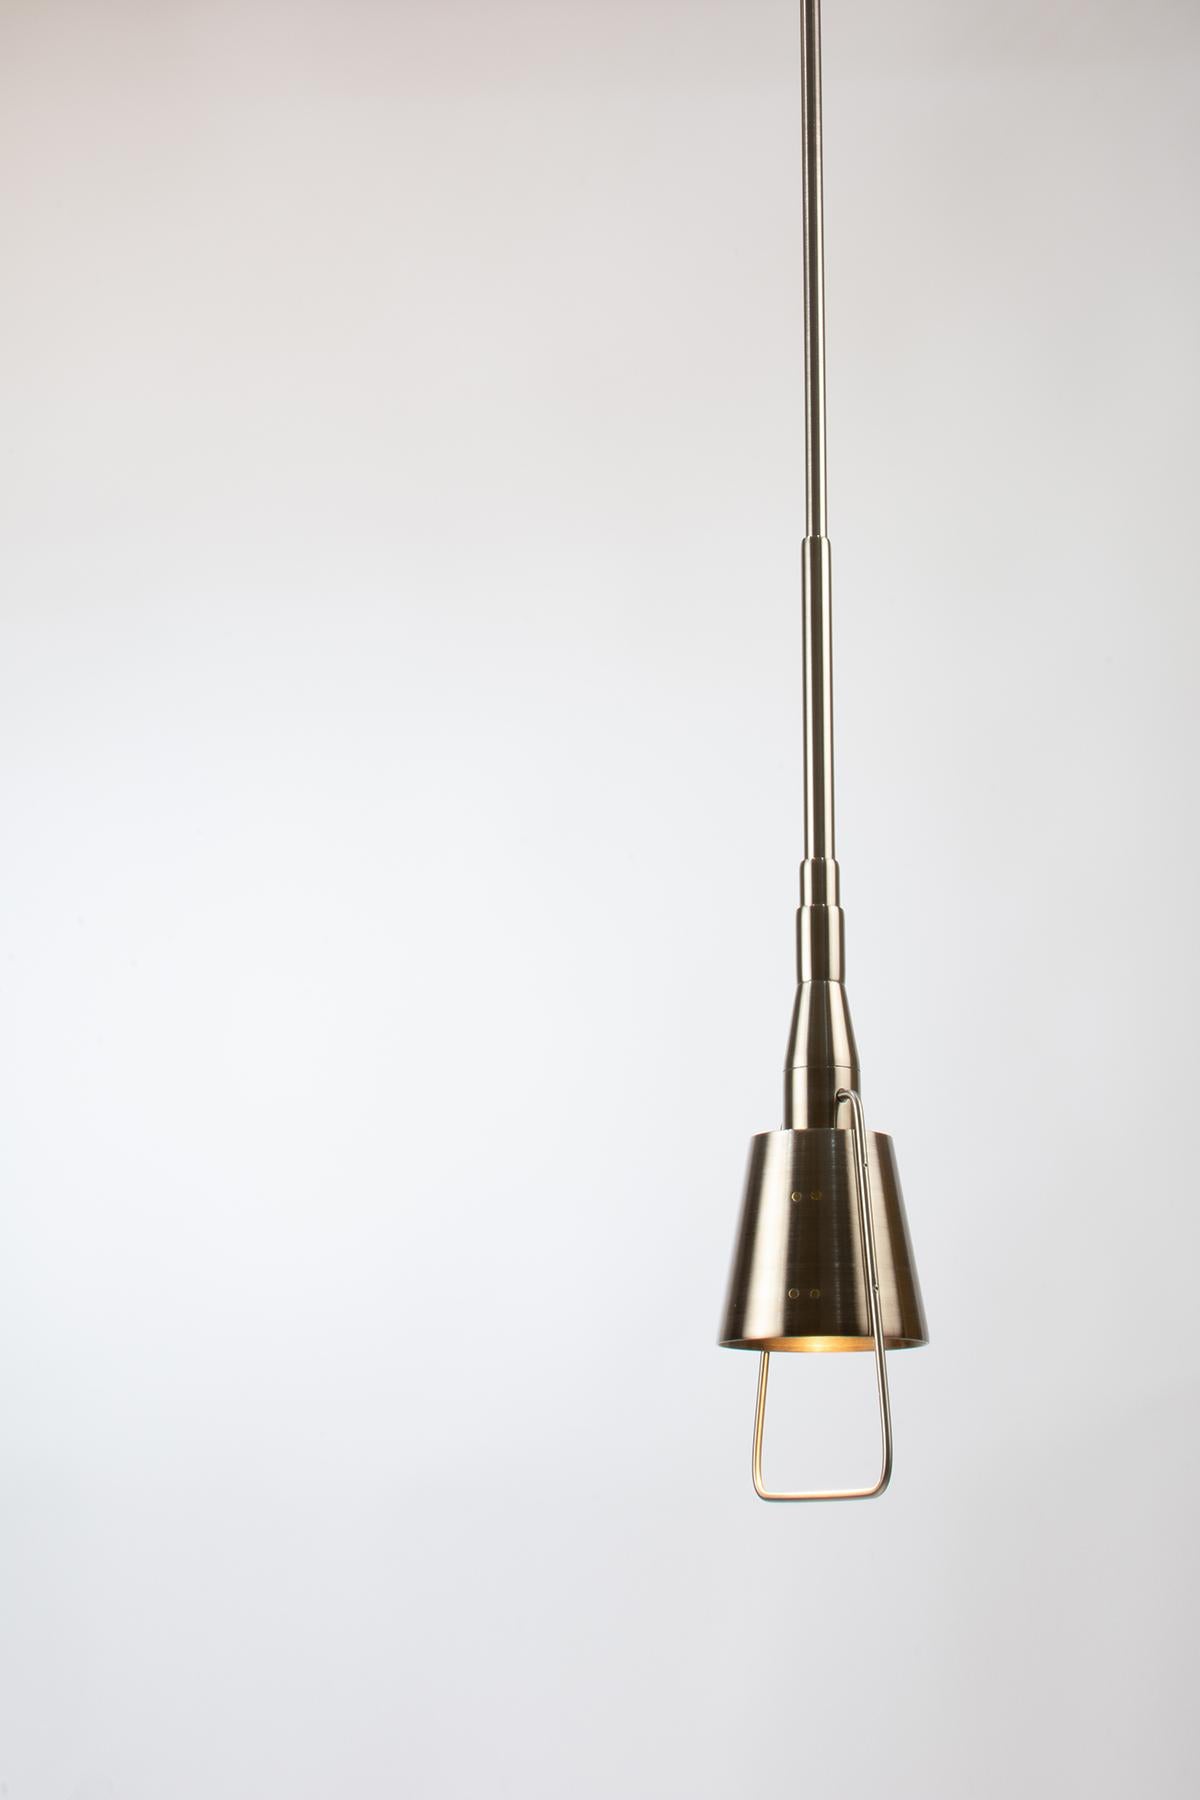 The exquisite pendant lamp, expertly crafted from high-quality stainless steel materials including pipes, rods, and reducers, 2 mm thick.

Designed to create a cozy light spot just above your coffee table, this lamp boasts a unique feature. A